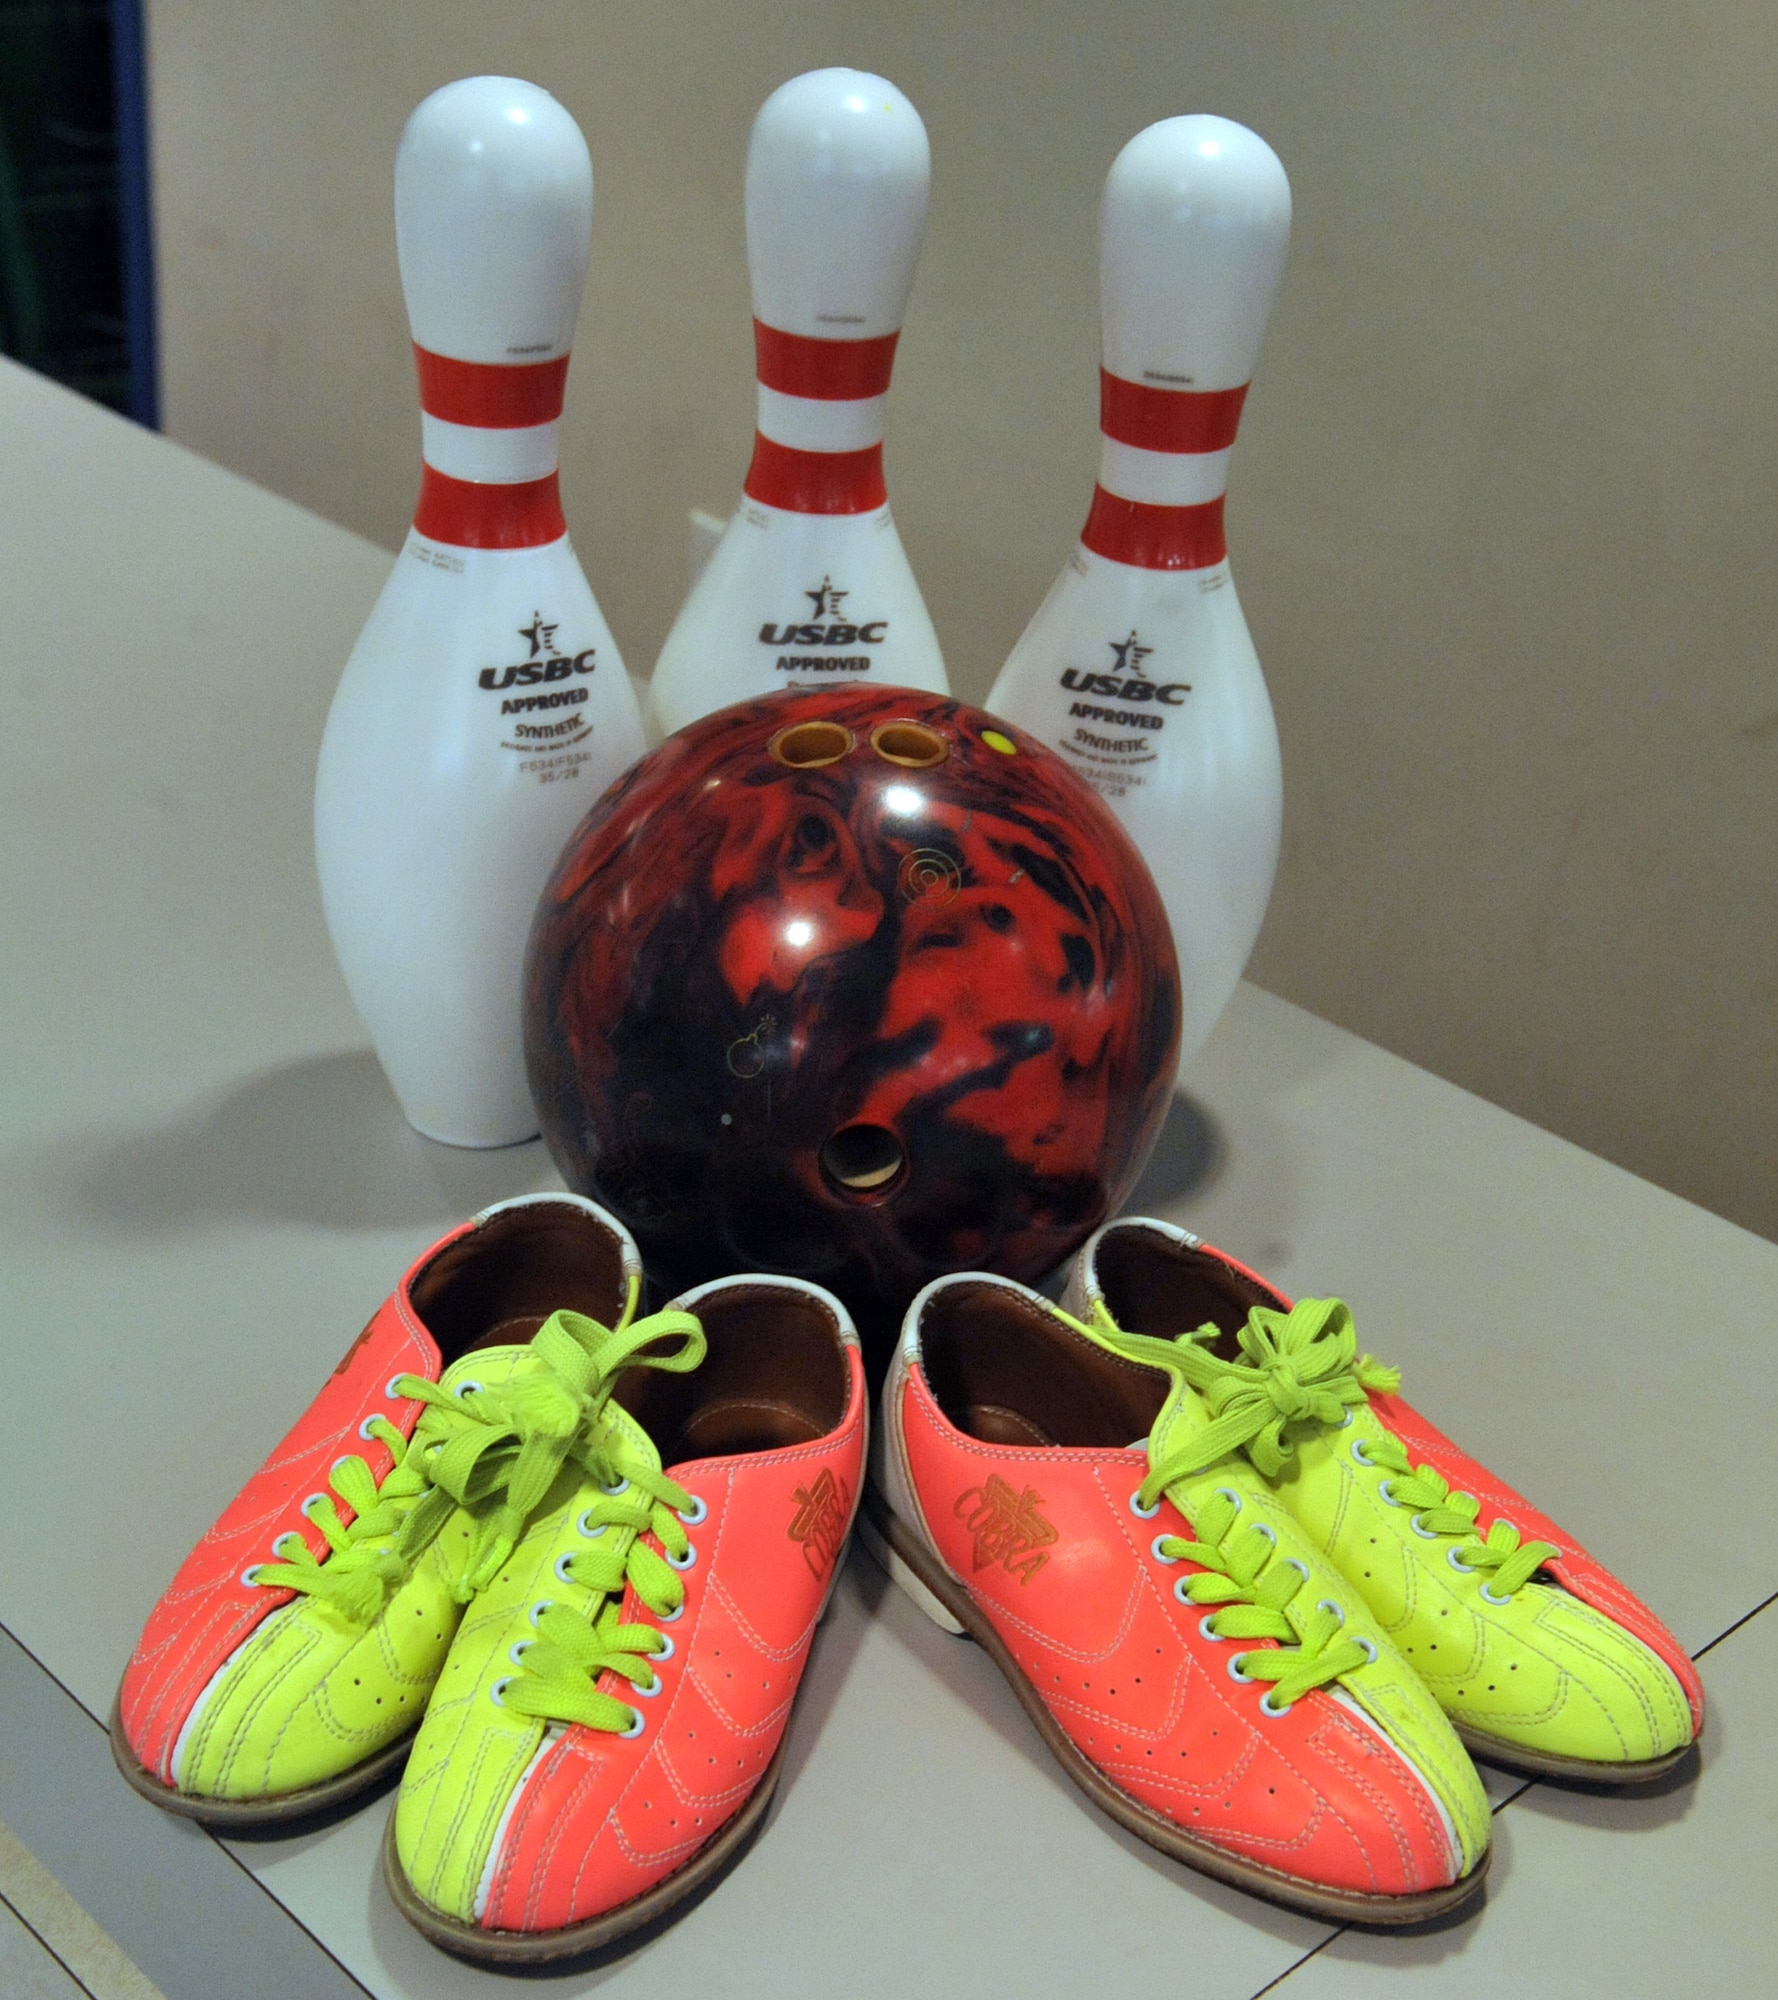 SEYMOUR JOHNSON AIR FORCE BASE, N.C. -- Bowlers at Planet Bowl can choose from 6 to 16 pound bowling balls and rent shoes, March 23, 2011. Planet Bowl also proposes a new bowler entertainment system offering different themes and displays more in-depth statistics including speed, average pins per lane and score. (U.S. Air Force photo/Senior Airman Whitney Lambert) (RELEASED)